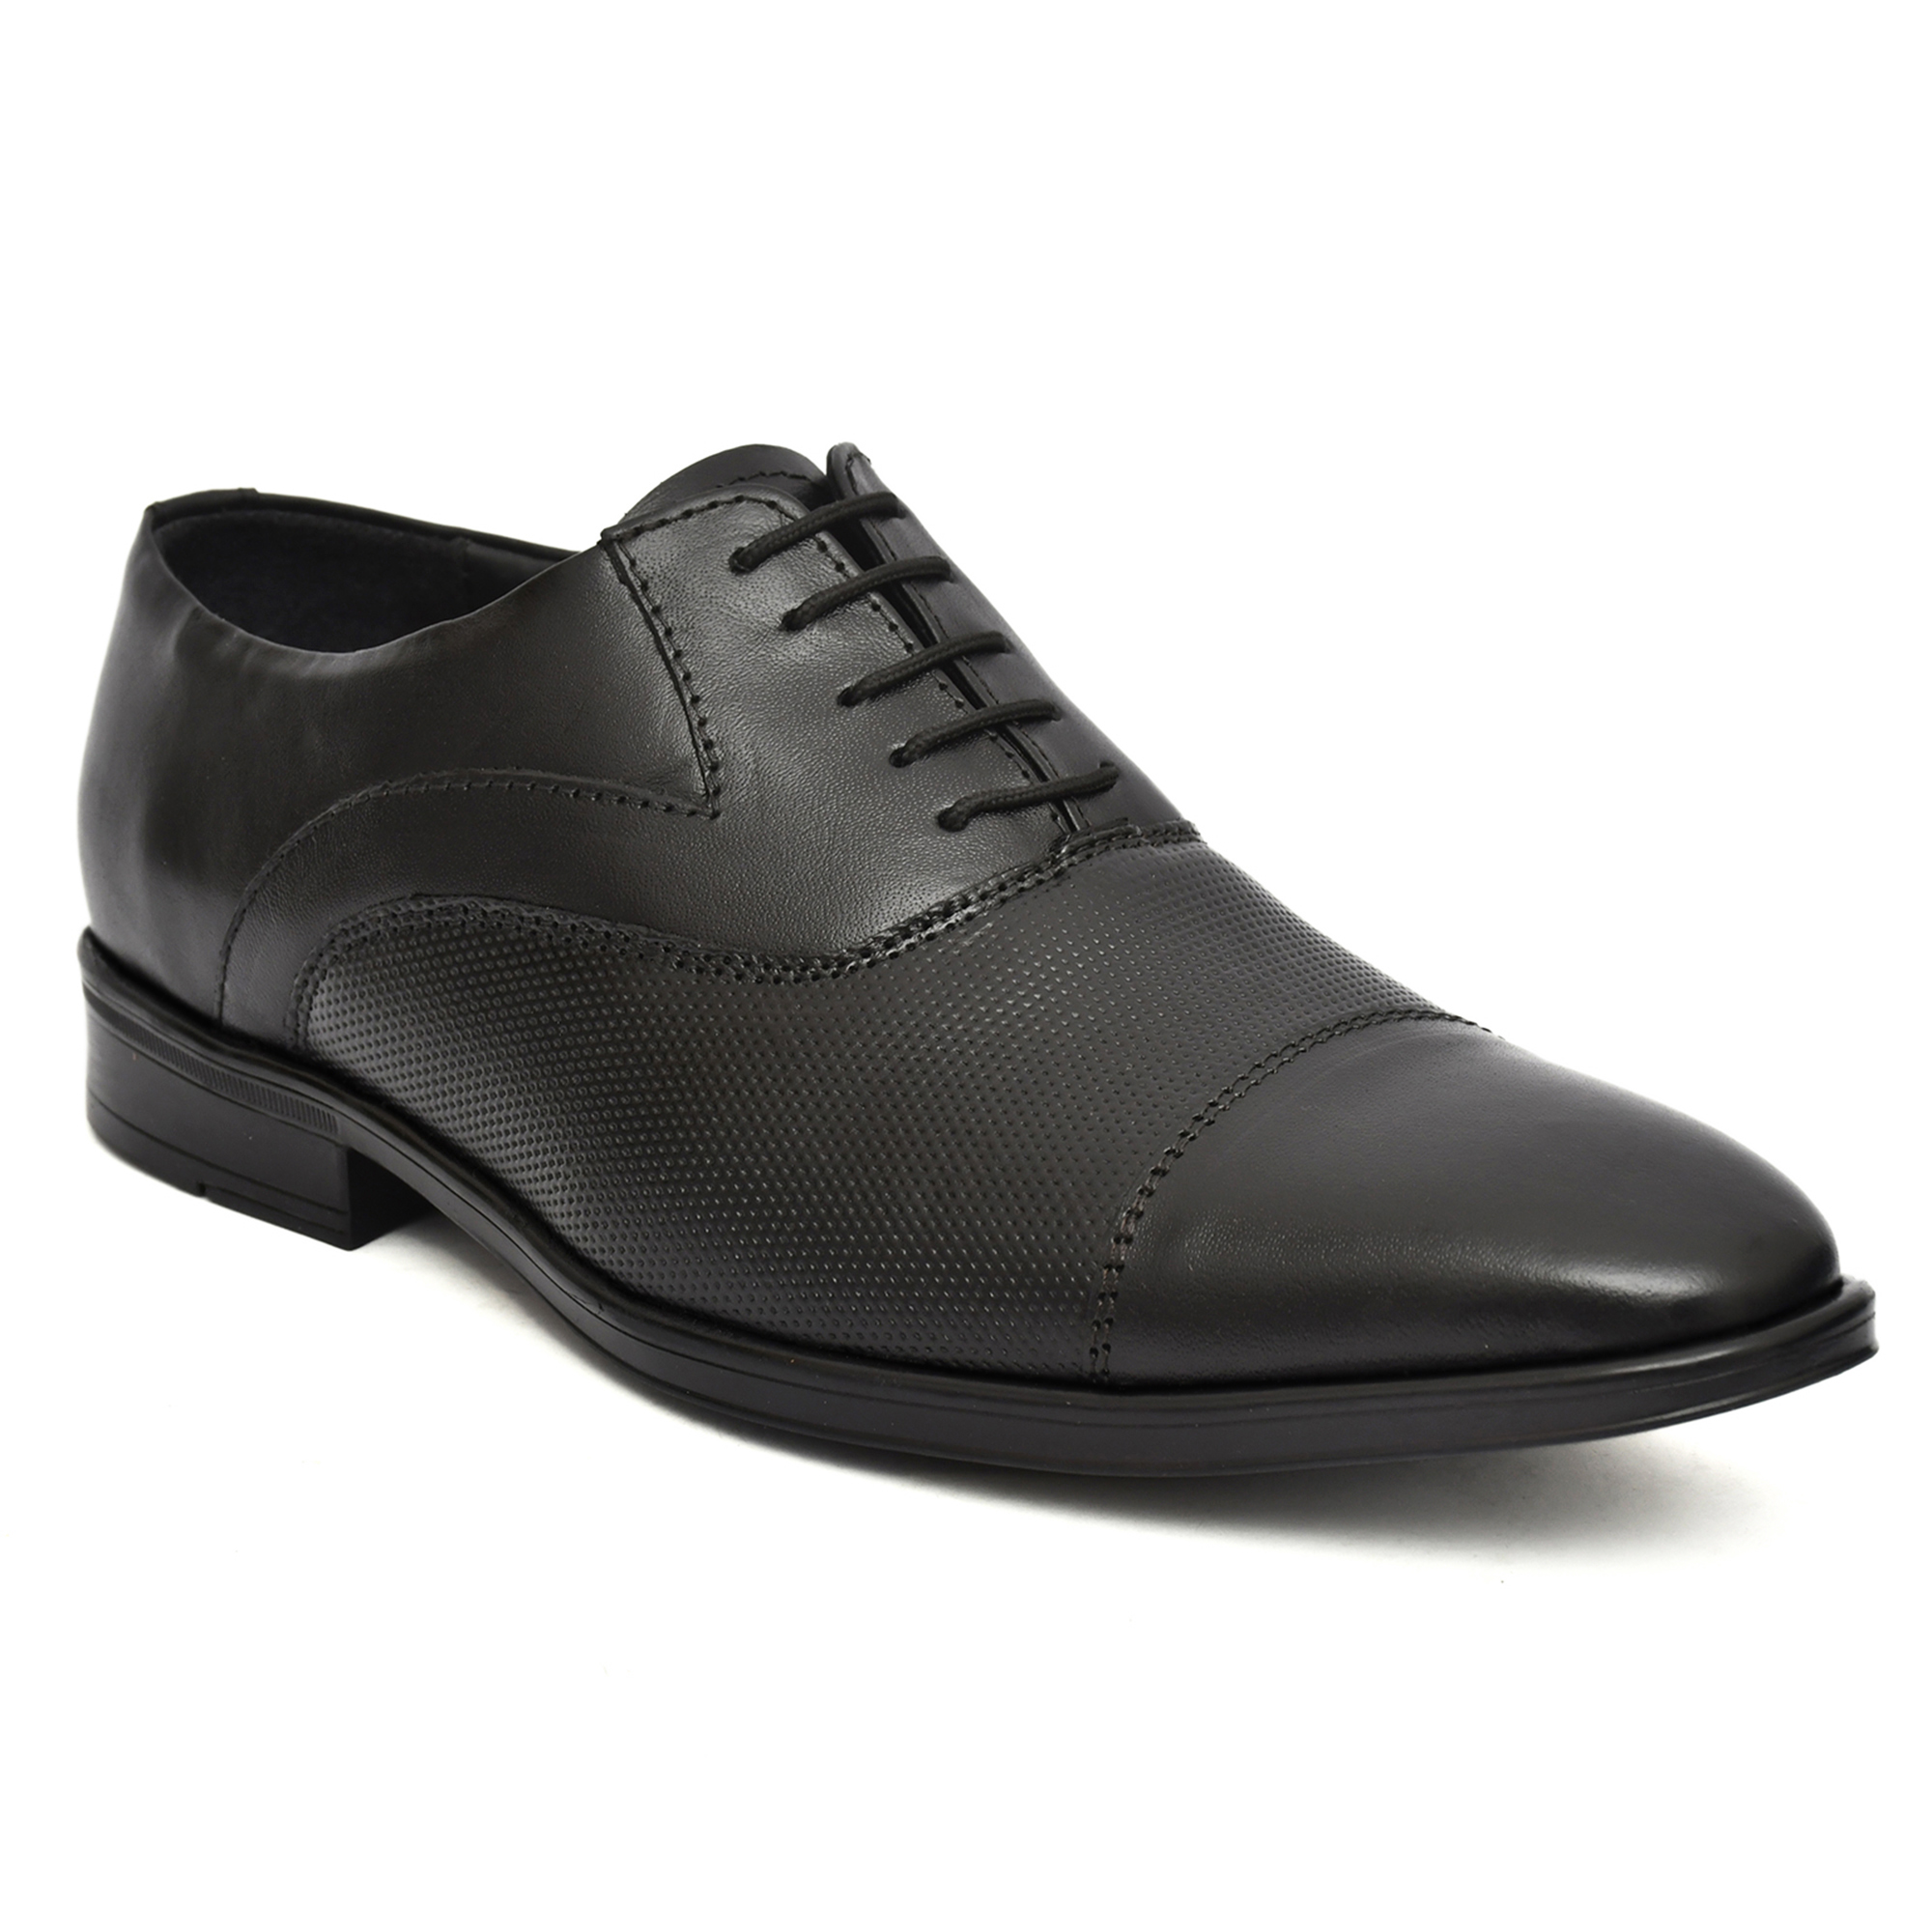 Black Leather Oxford Shoes for men with Memory foam footpad. Size: 5-11UK